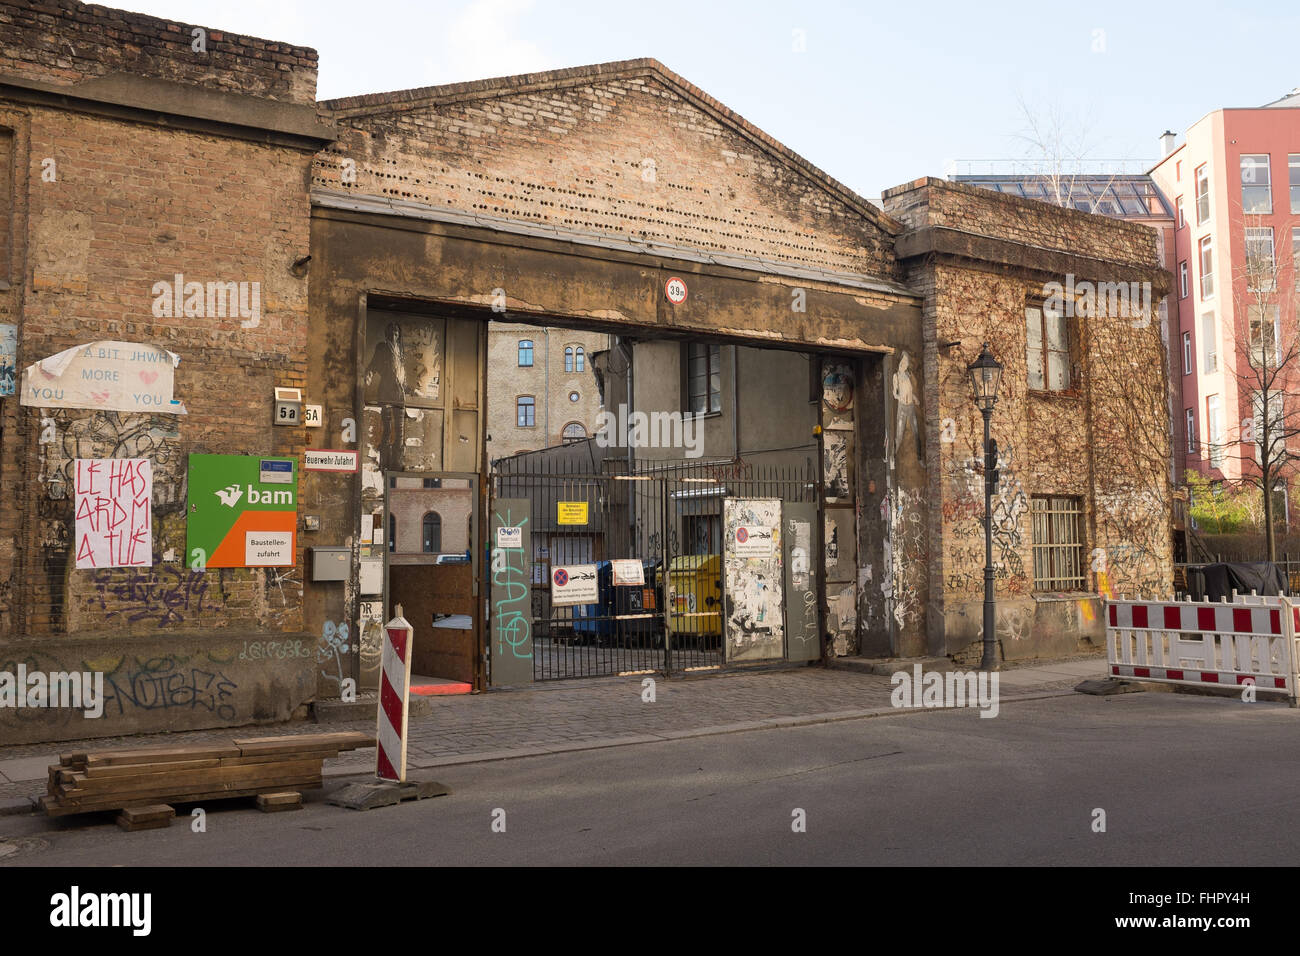 RLIN, FEBRUARY 24: Rear entrance door of the 'Postfuhramt' building in Berlin on February 24, 2016. Stock Photo